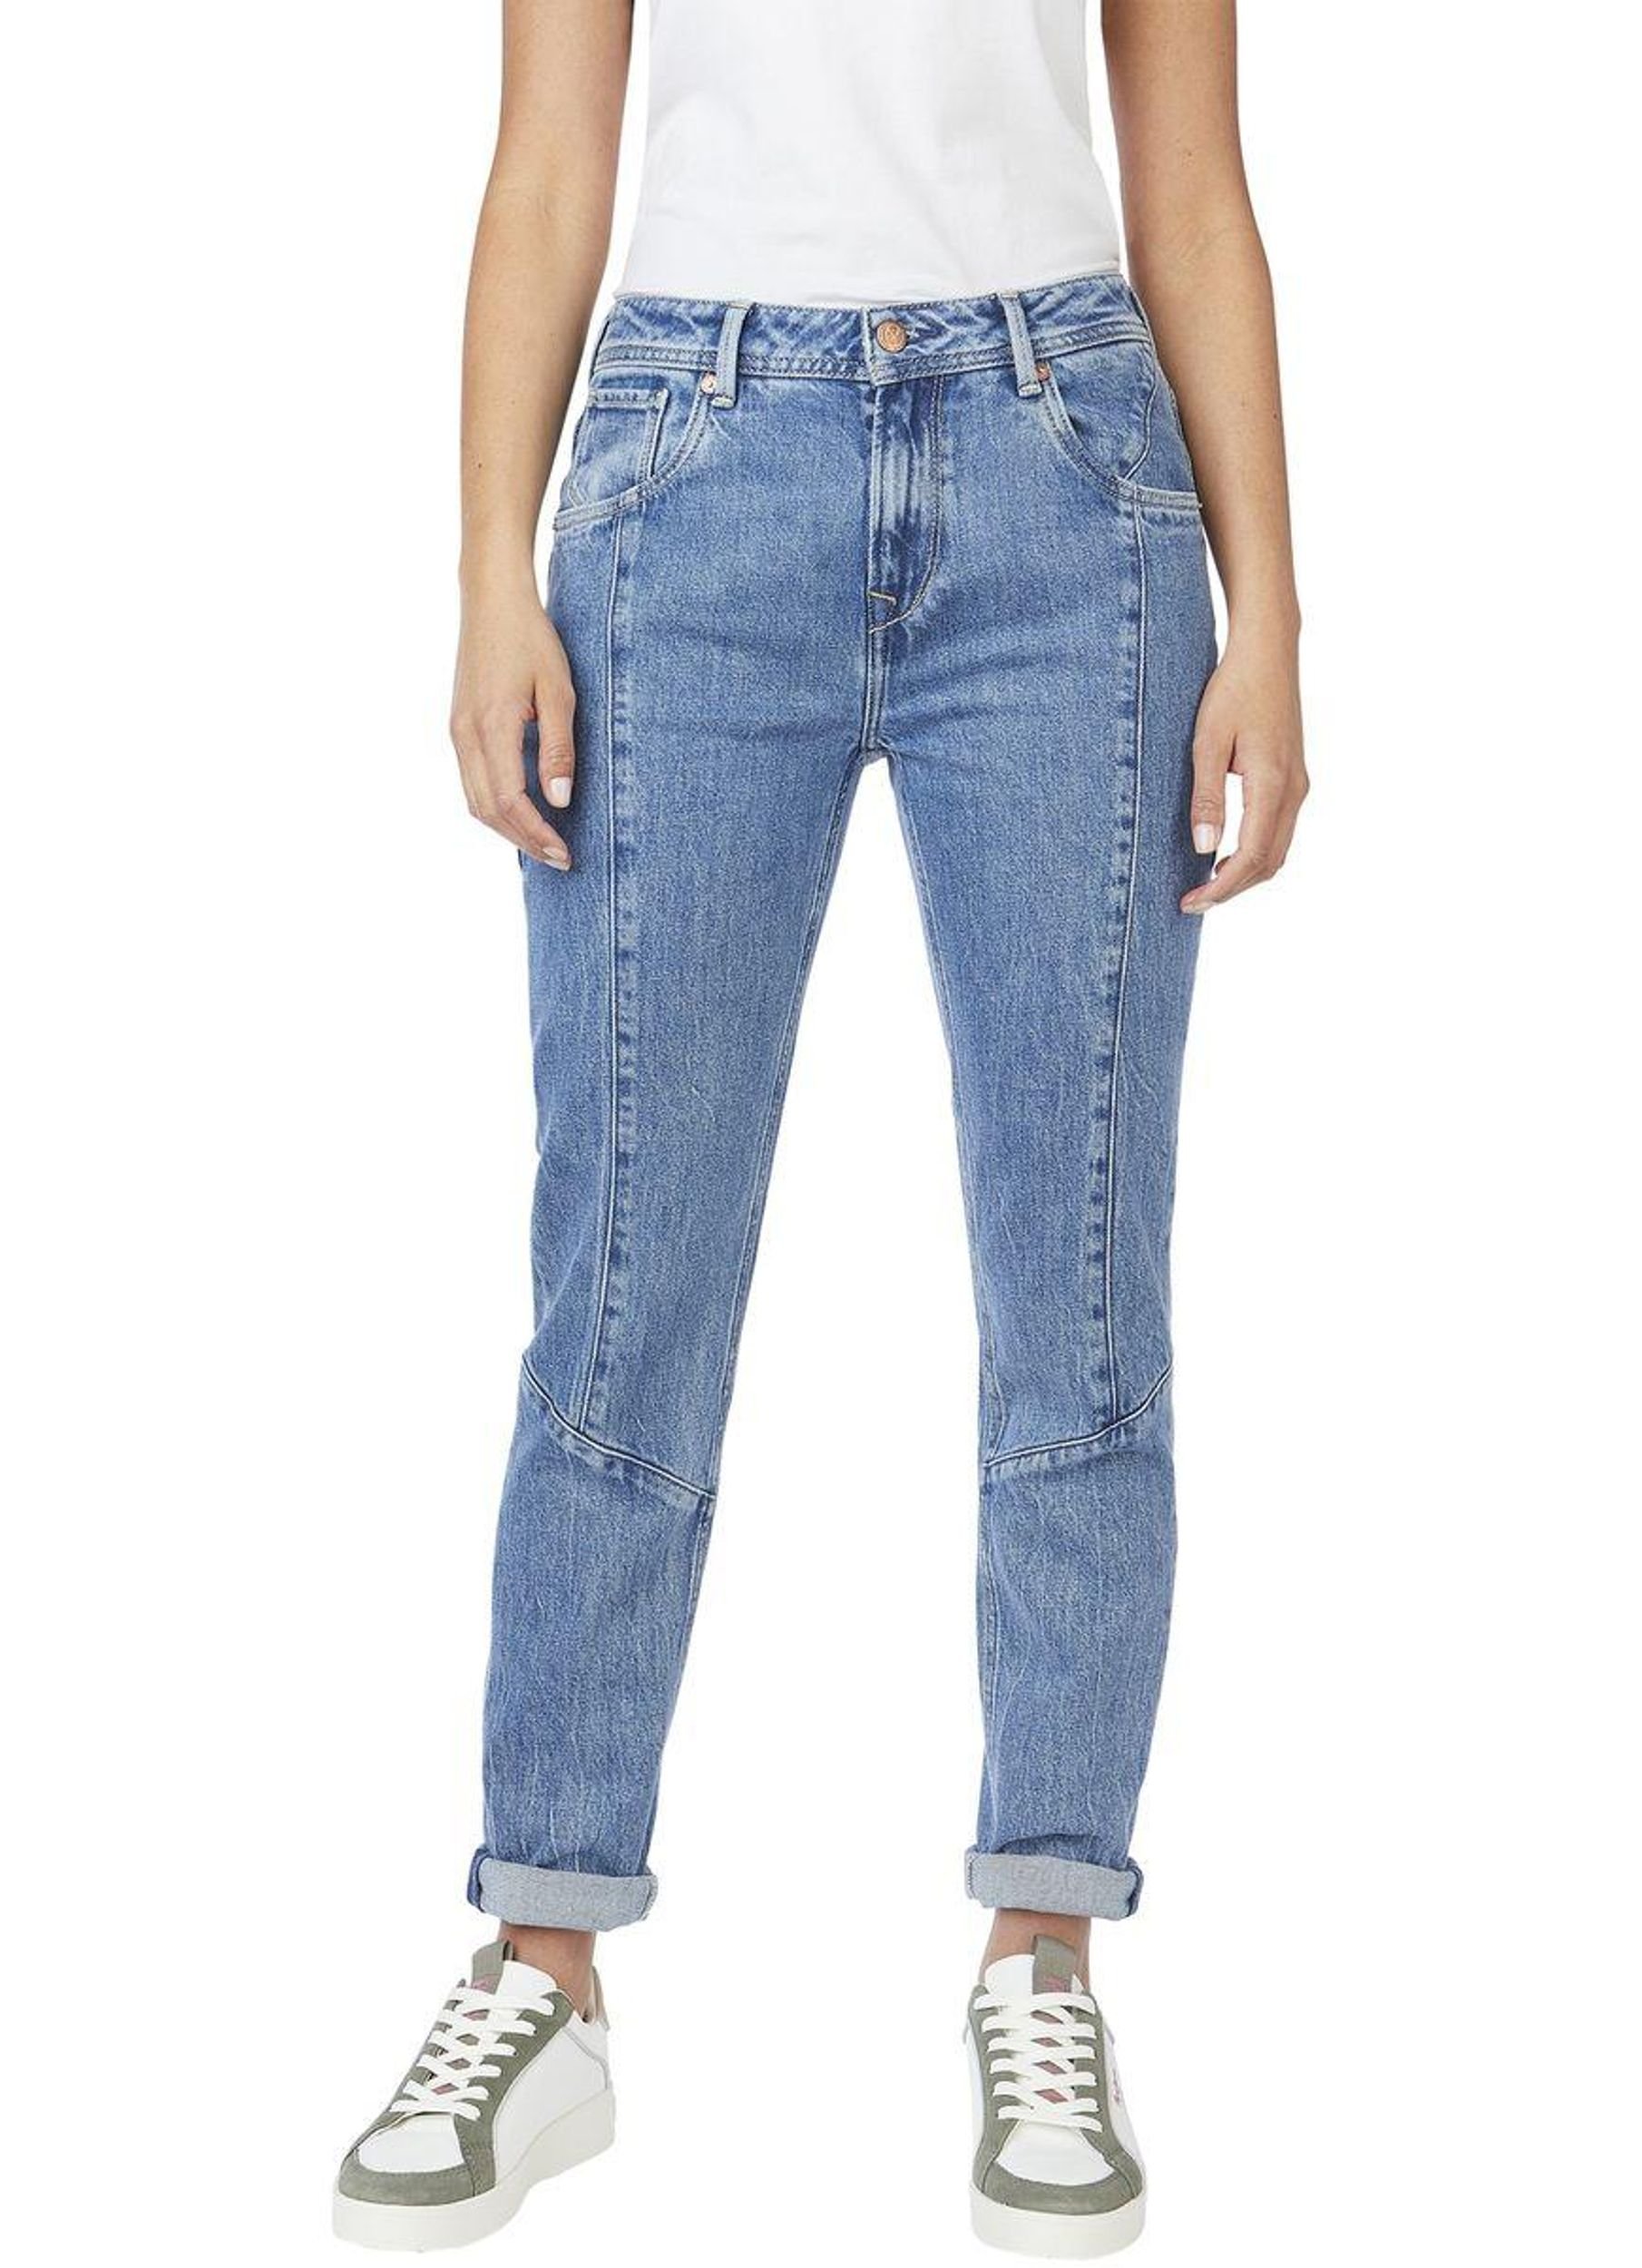 VIOLET GEO RELAXED FIT HIGH WAIST JEANS